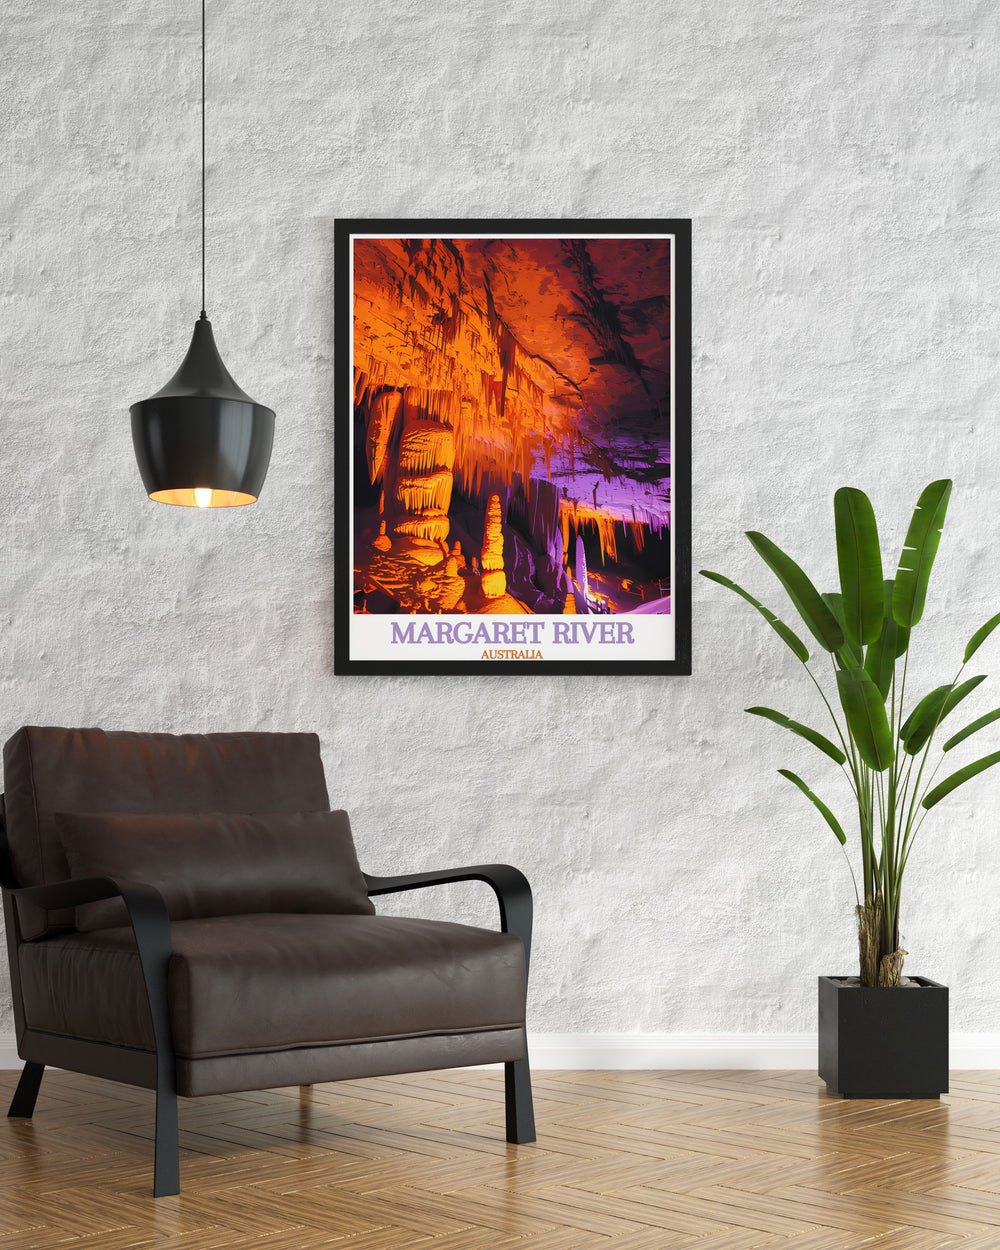 Transform your living space with Australia Travel Art showcasing the serene beauty of Margaret River and Mammoth Cave ideal for nature lovers and art enthusiasts